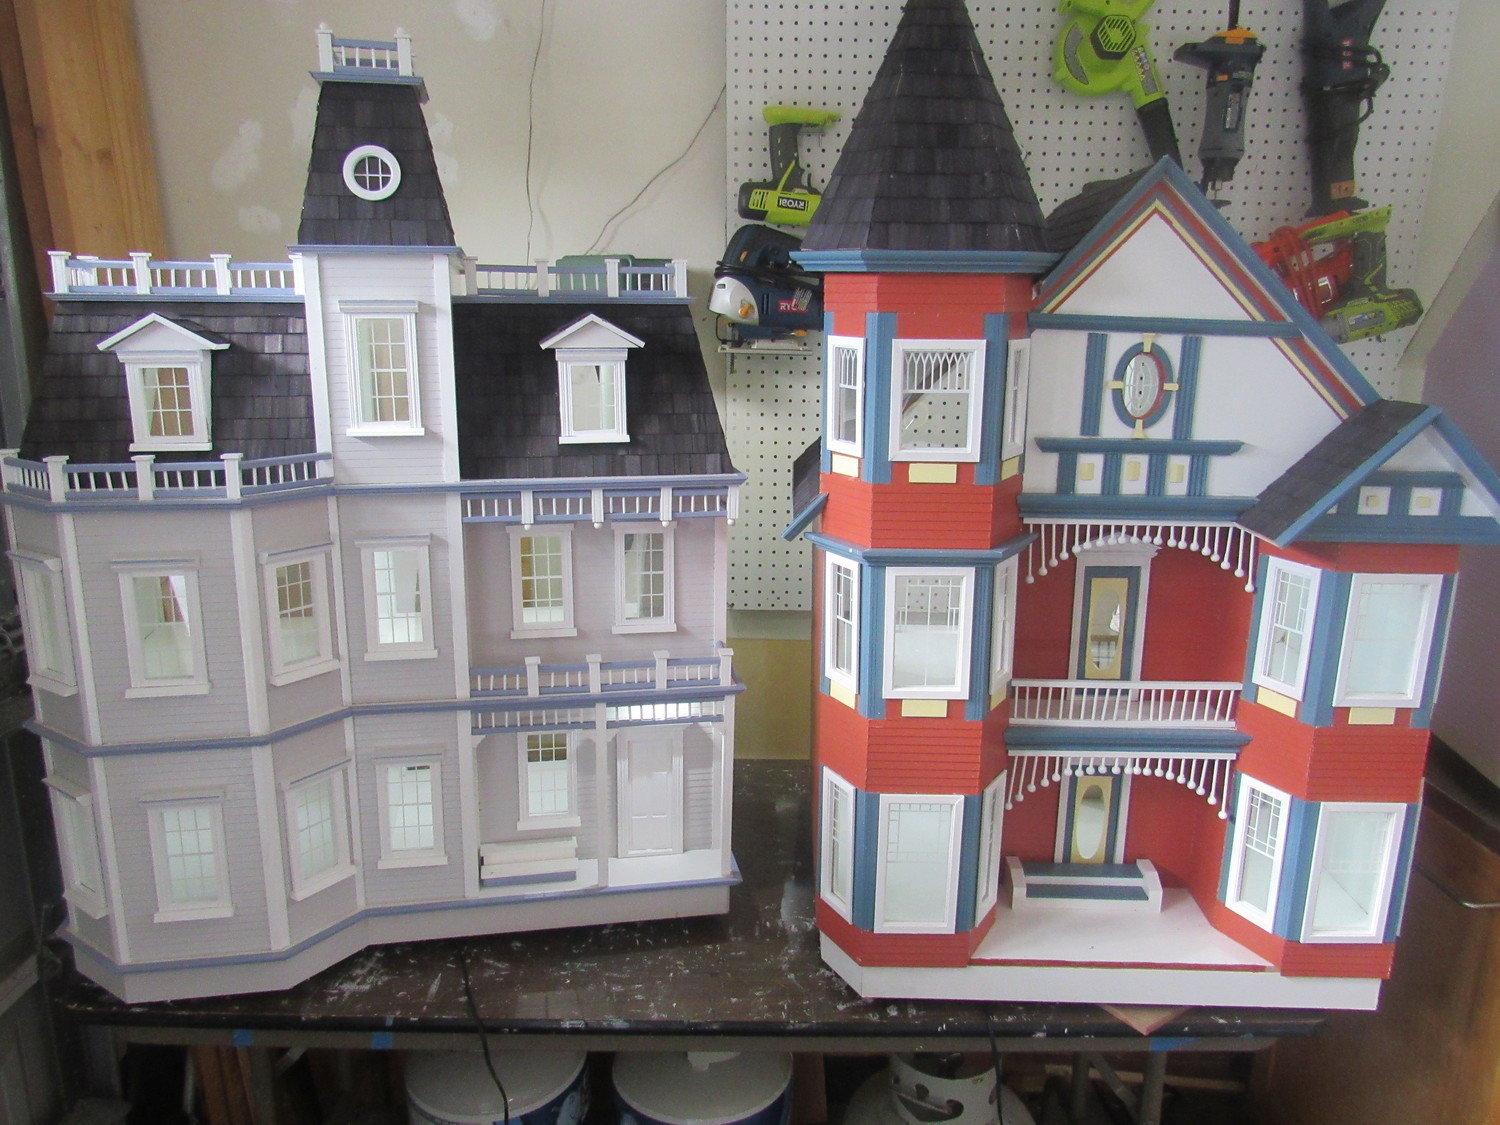 Two of the elaborate dollhouses created by Brendan Hoffman for children in the Community PedsCare program.